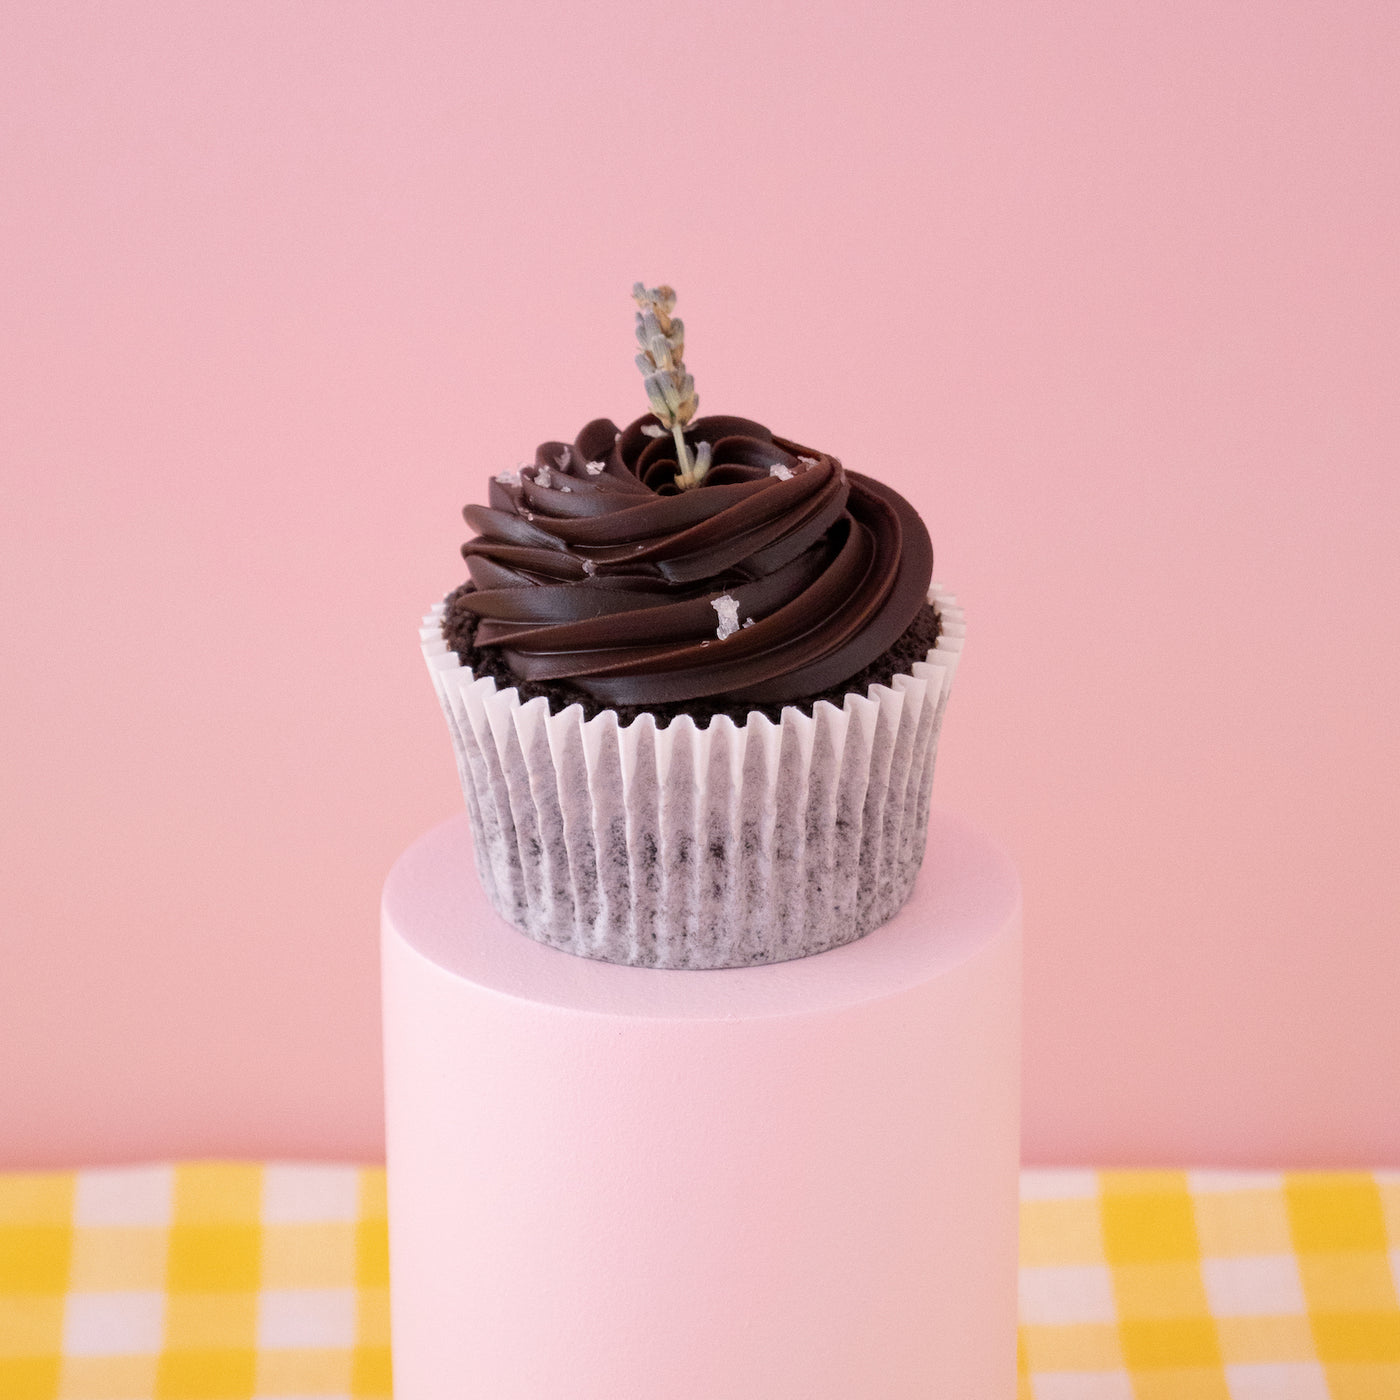 Lavender infused Salted Chocolate Ganache Cupcakes